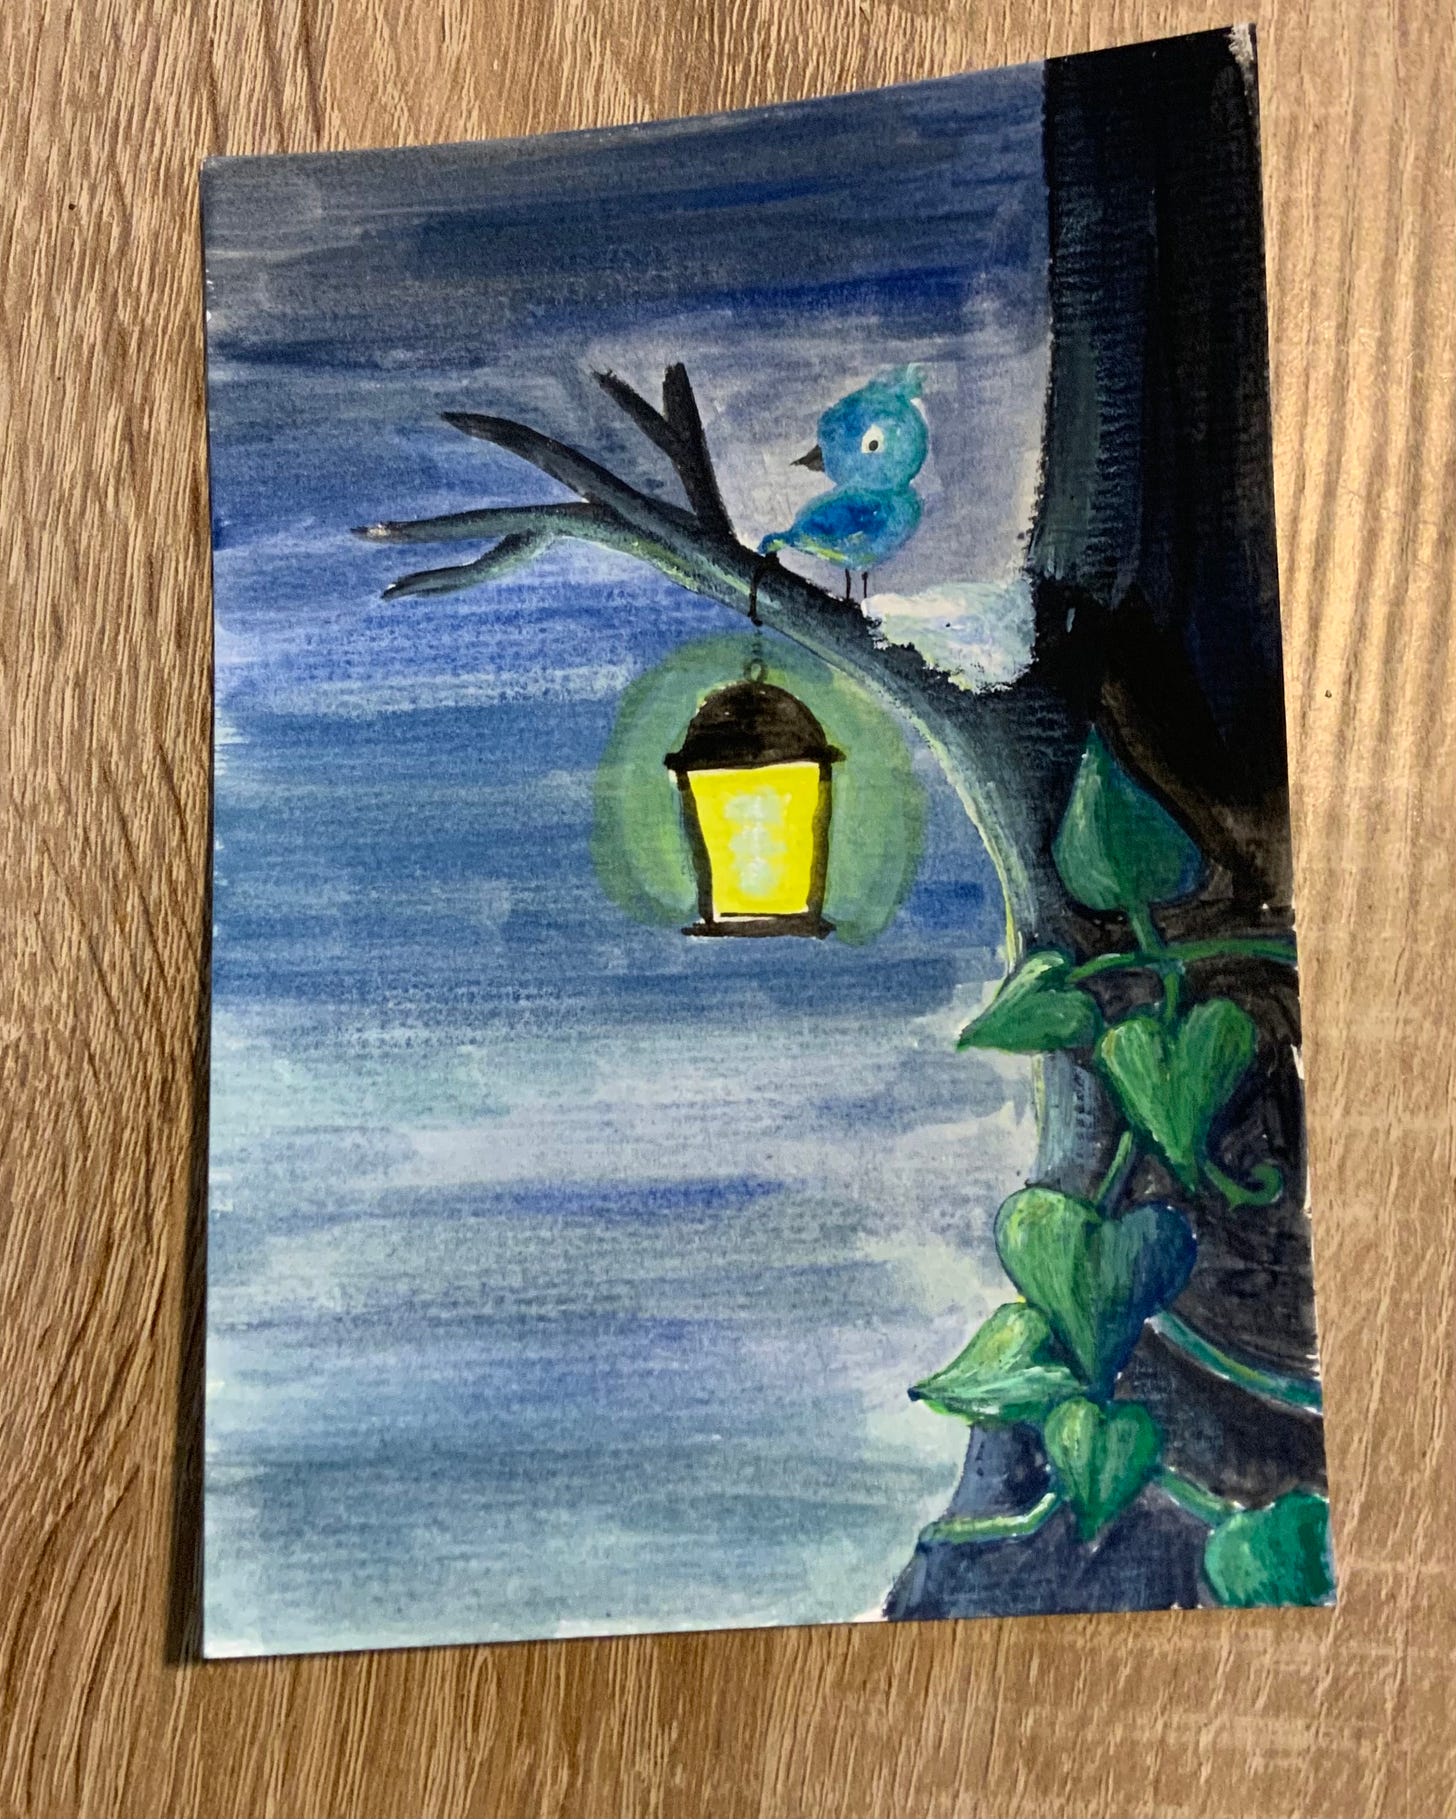 Painting of a tree with a lantern on a branch. A bird is sitting on top of the branch